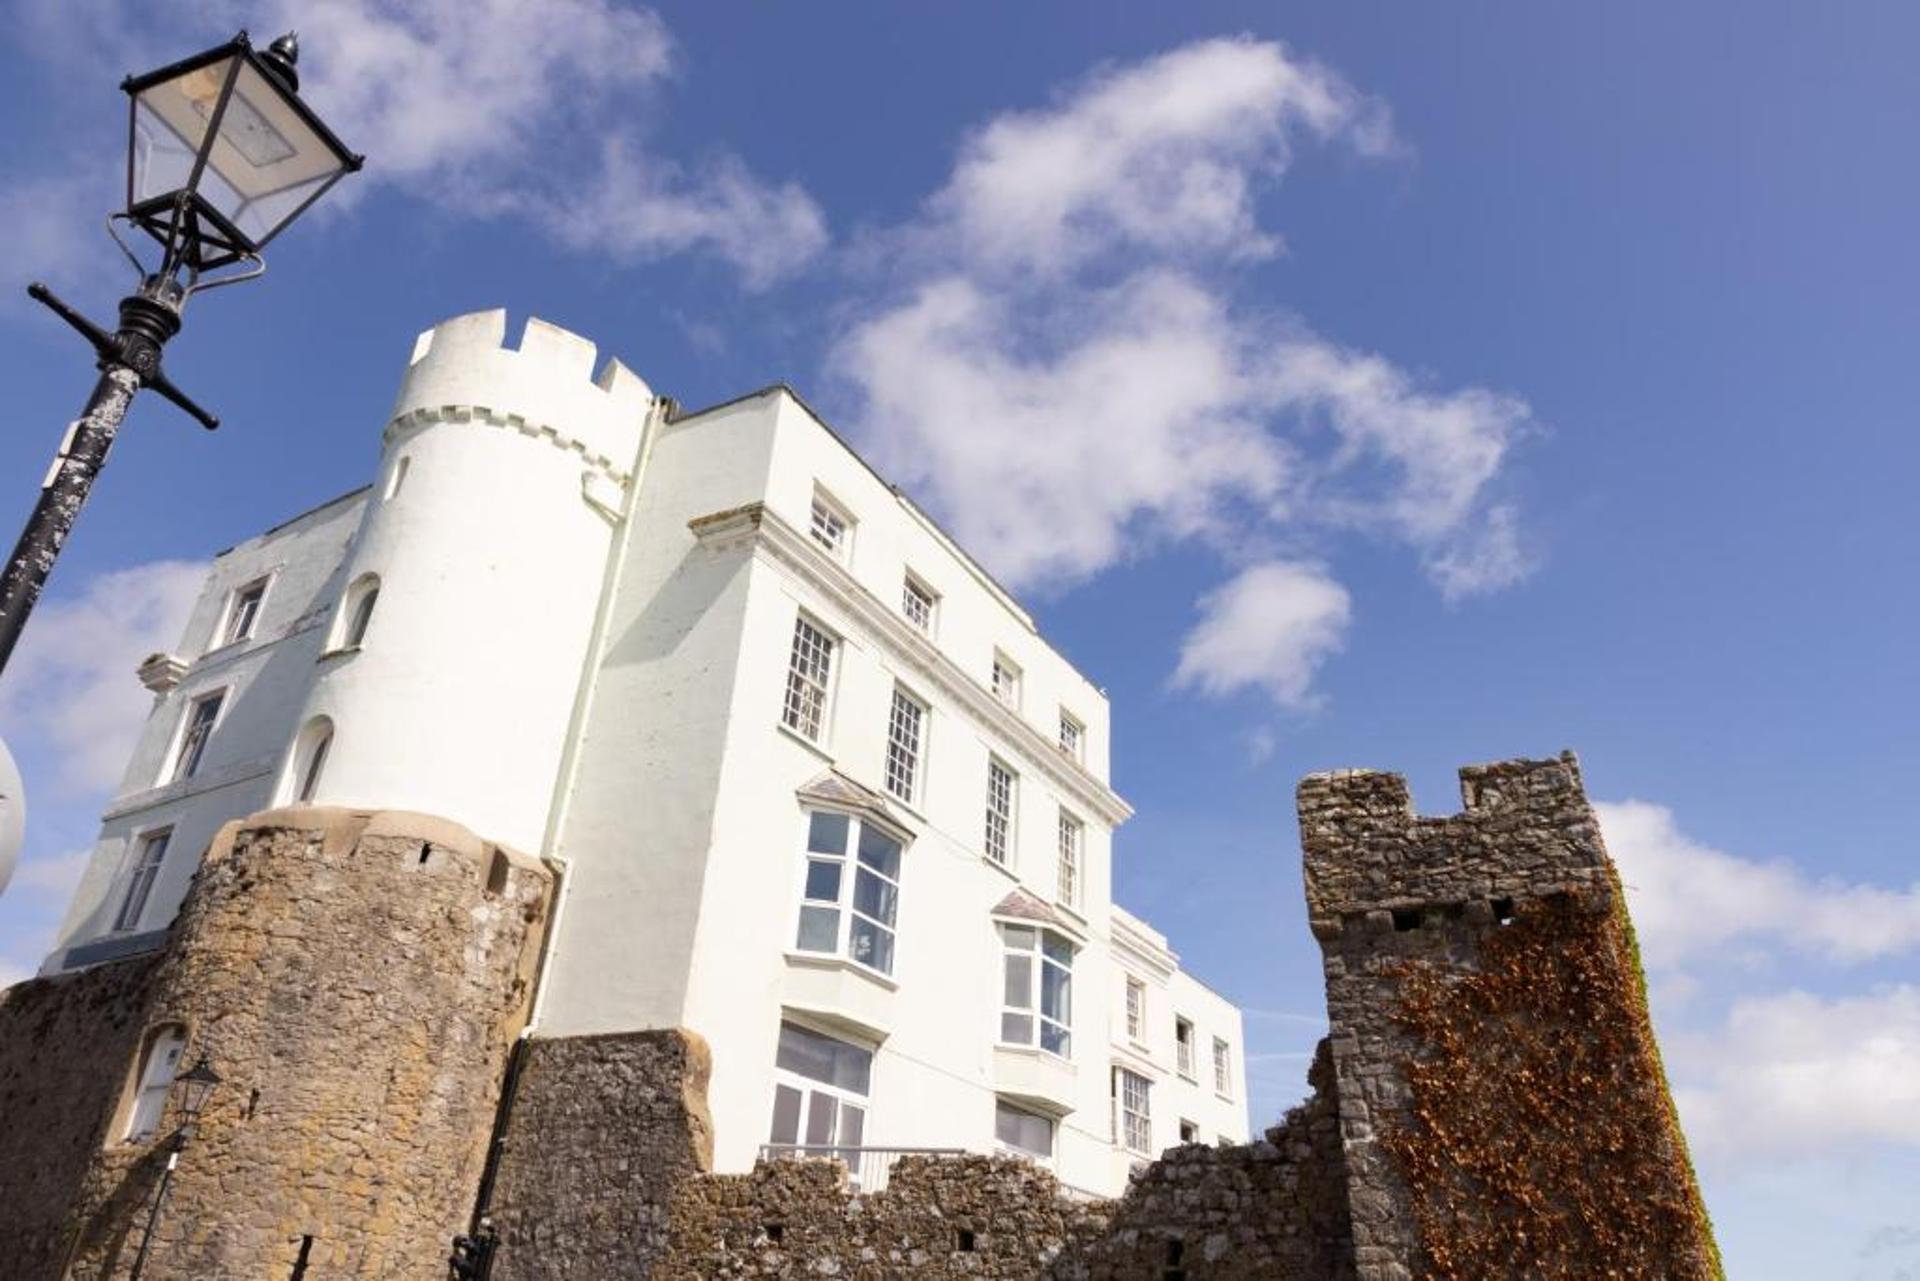 Tenby’s Imperial Hotel sold to new owner 